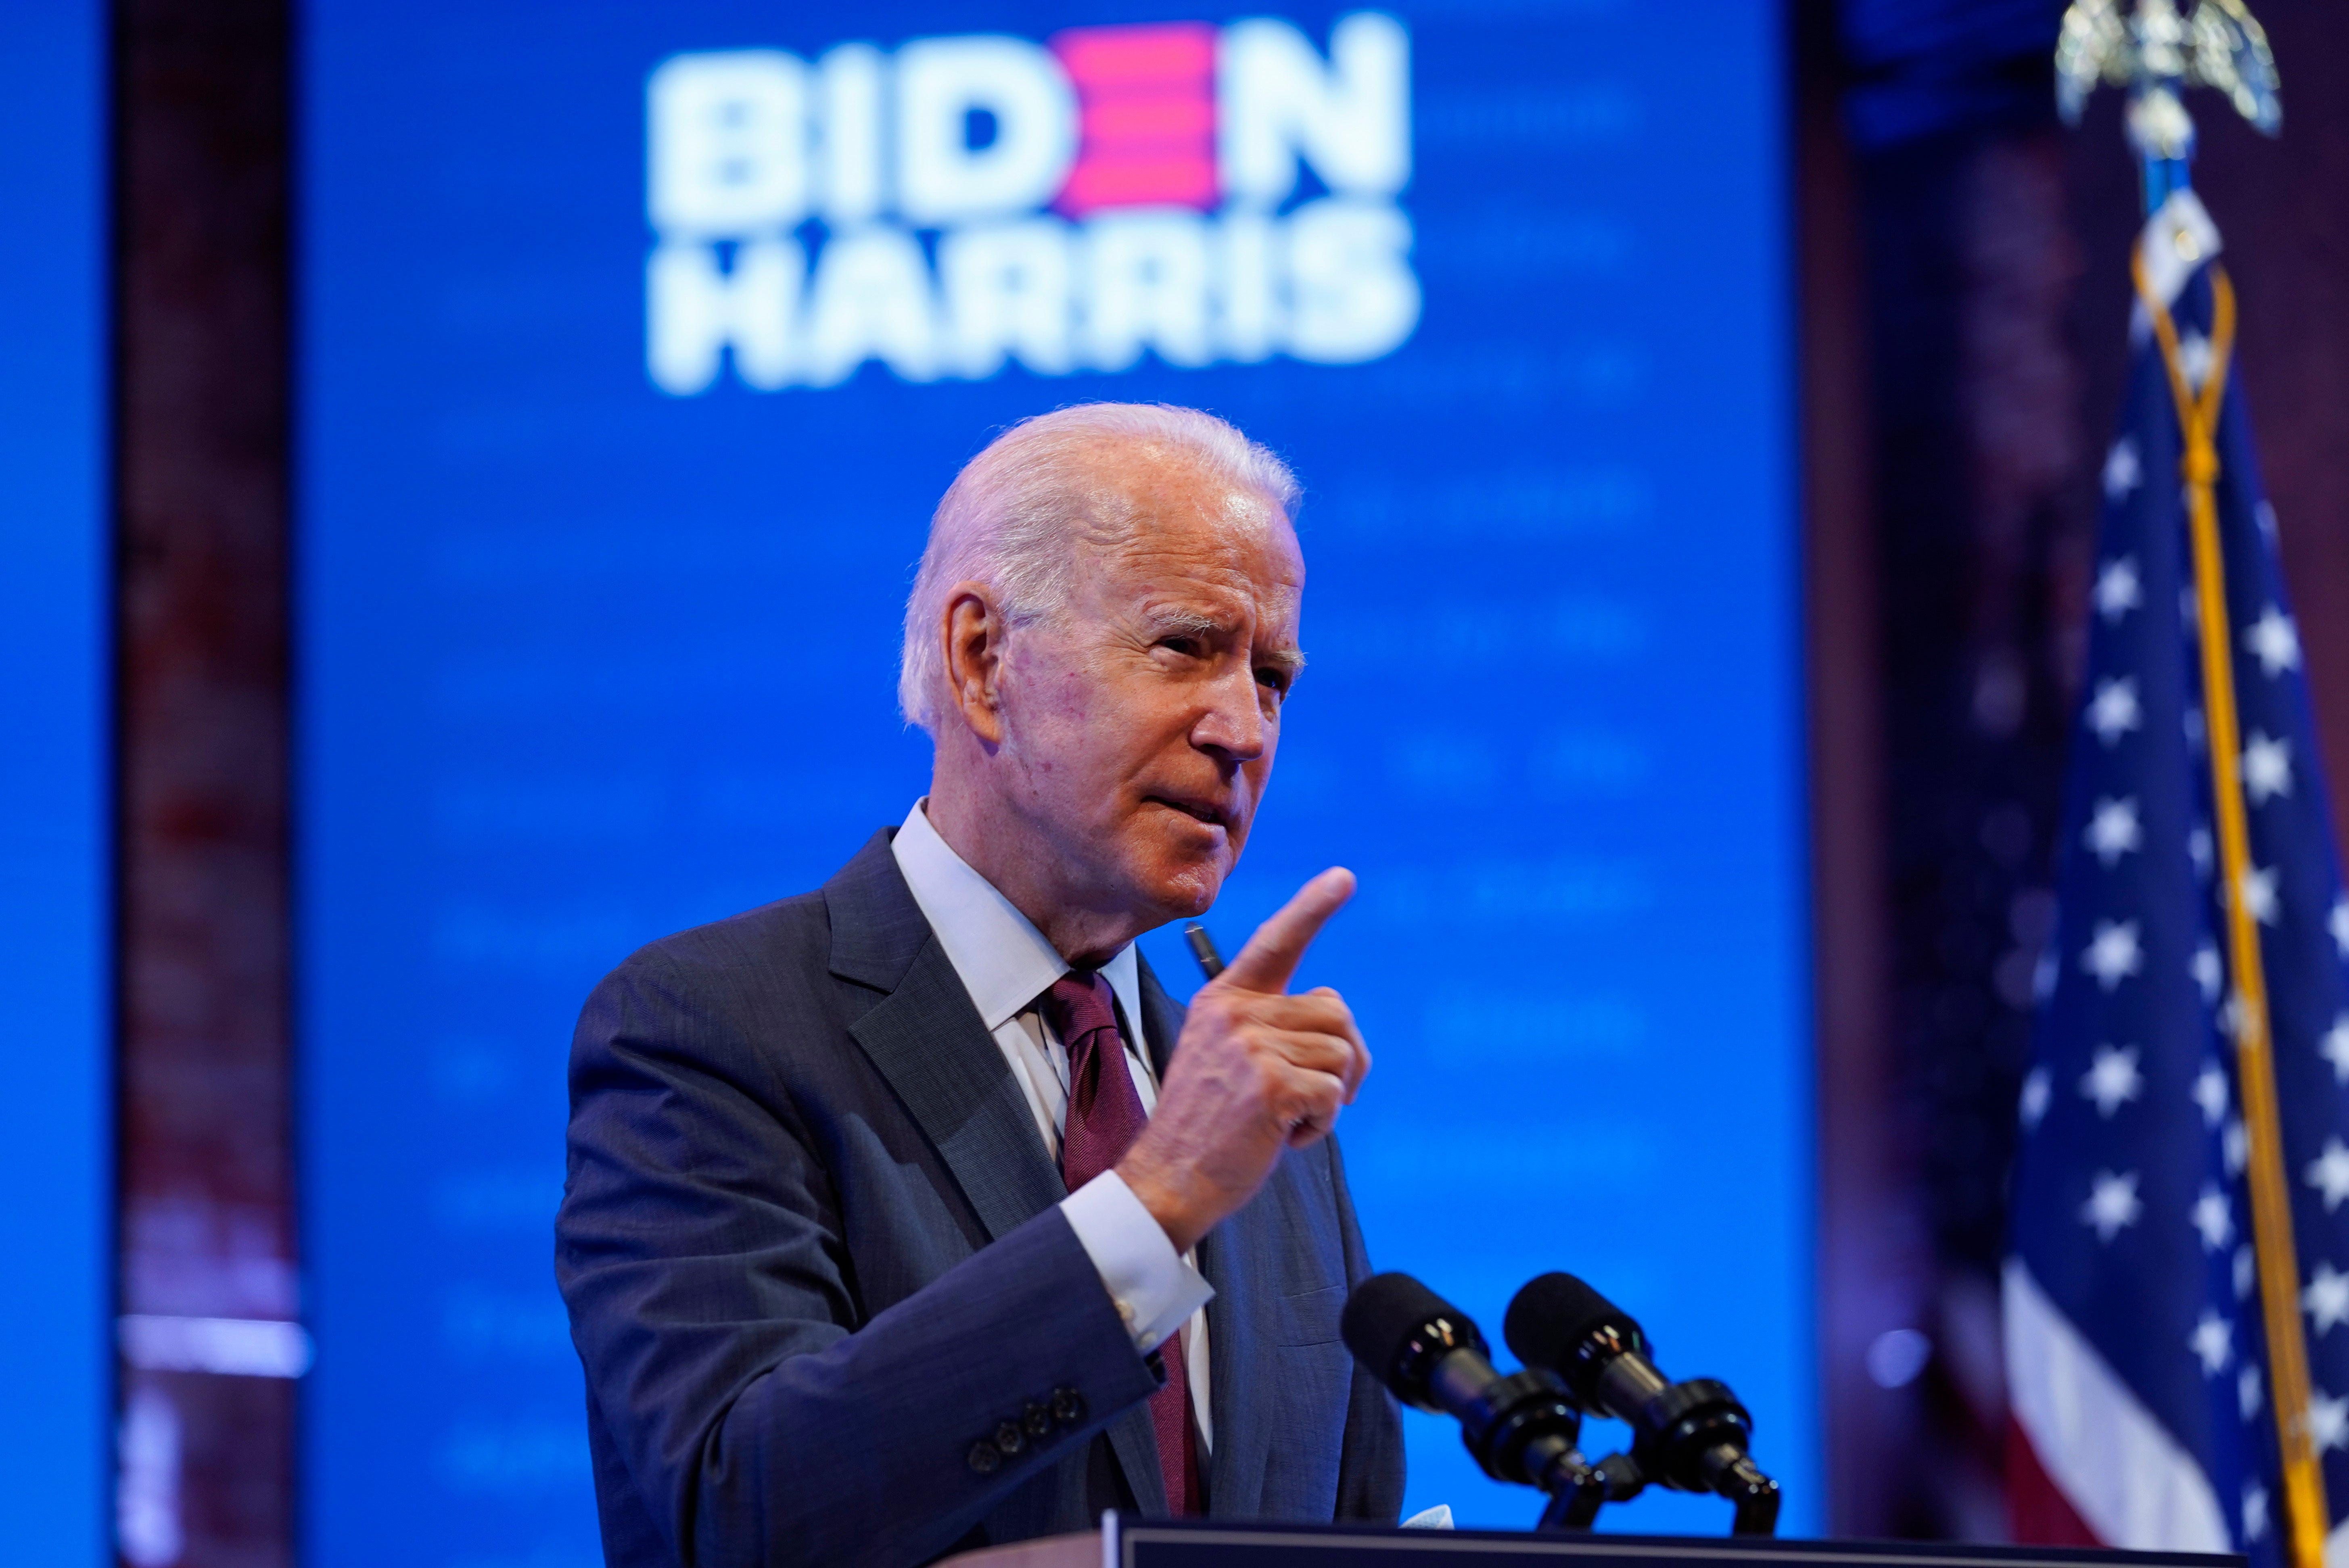 Biden is attempting to lead by example. But will this be enough to head off his opponent?